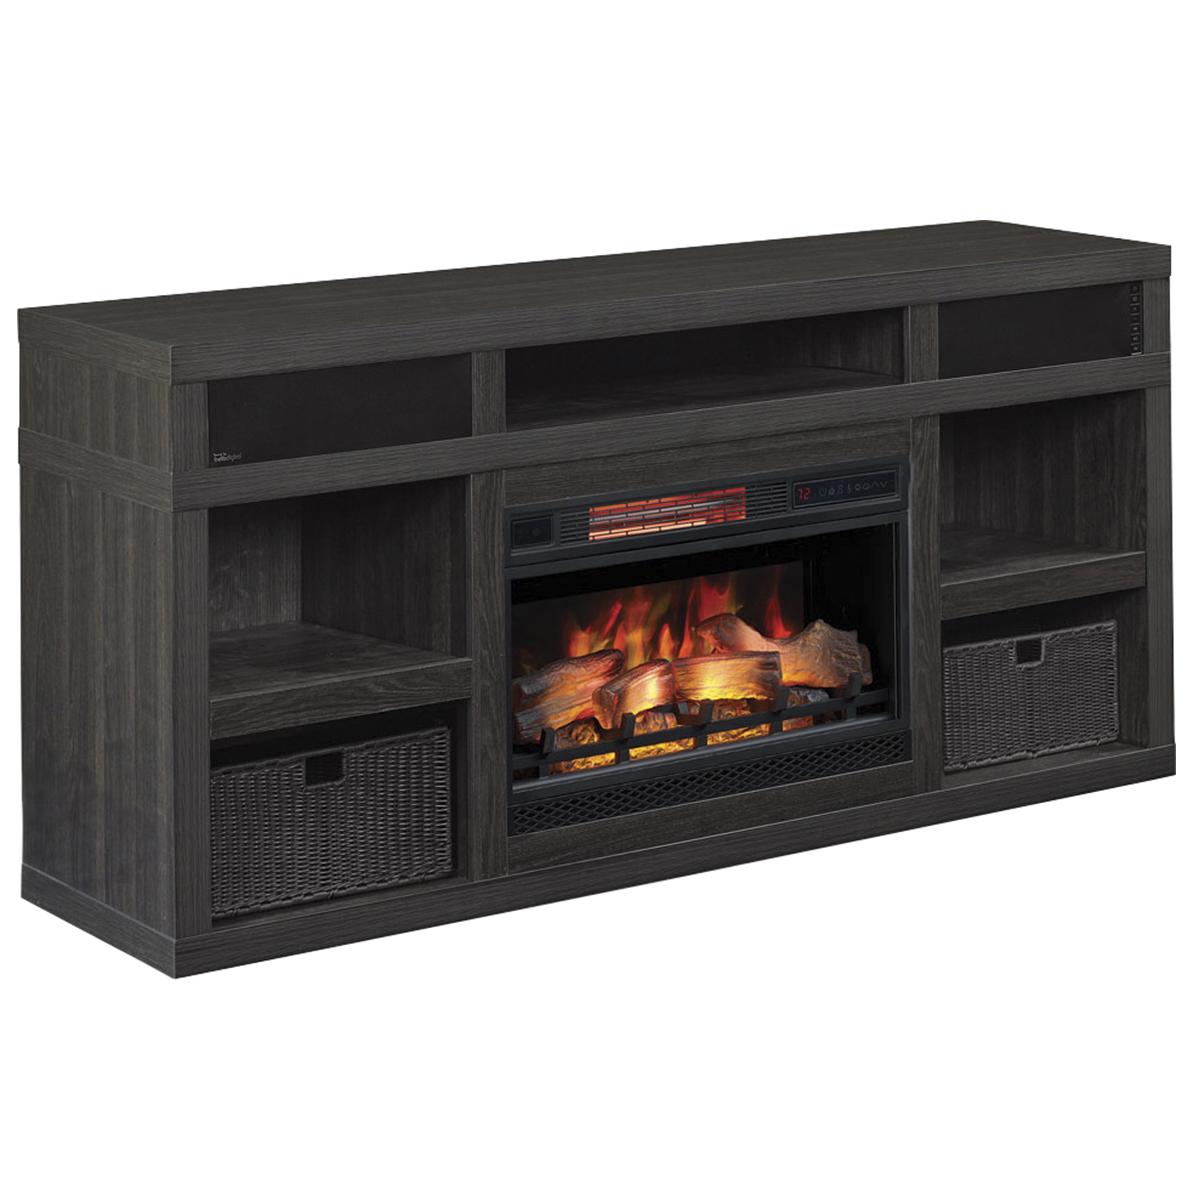 Tv Stand W Fireplace Unique Fabio Flames Greatlin 64" Tv Stand In Black Walnut